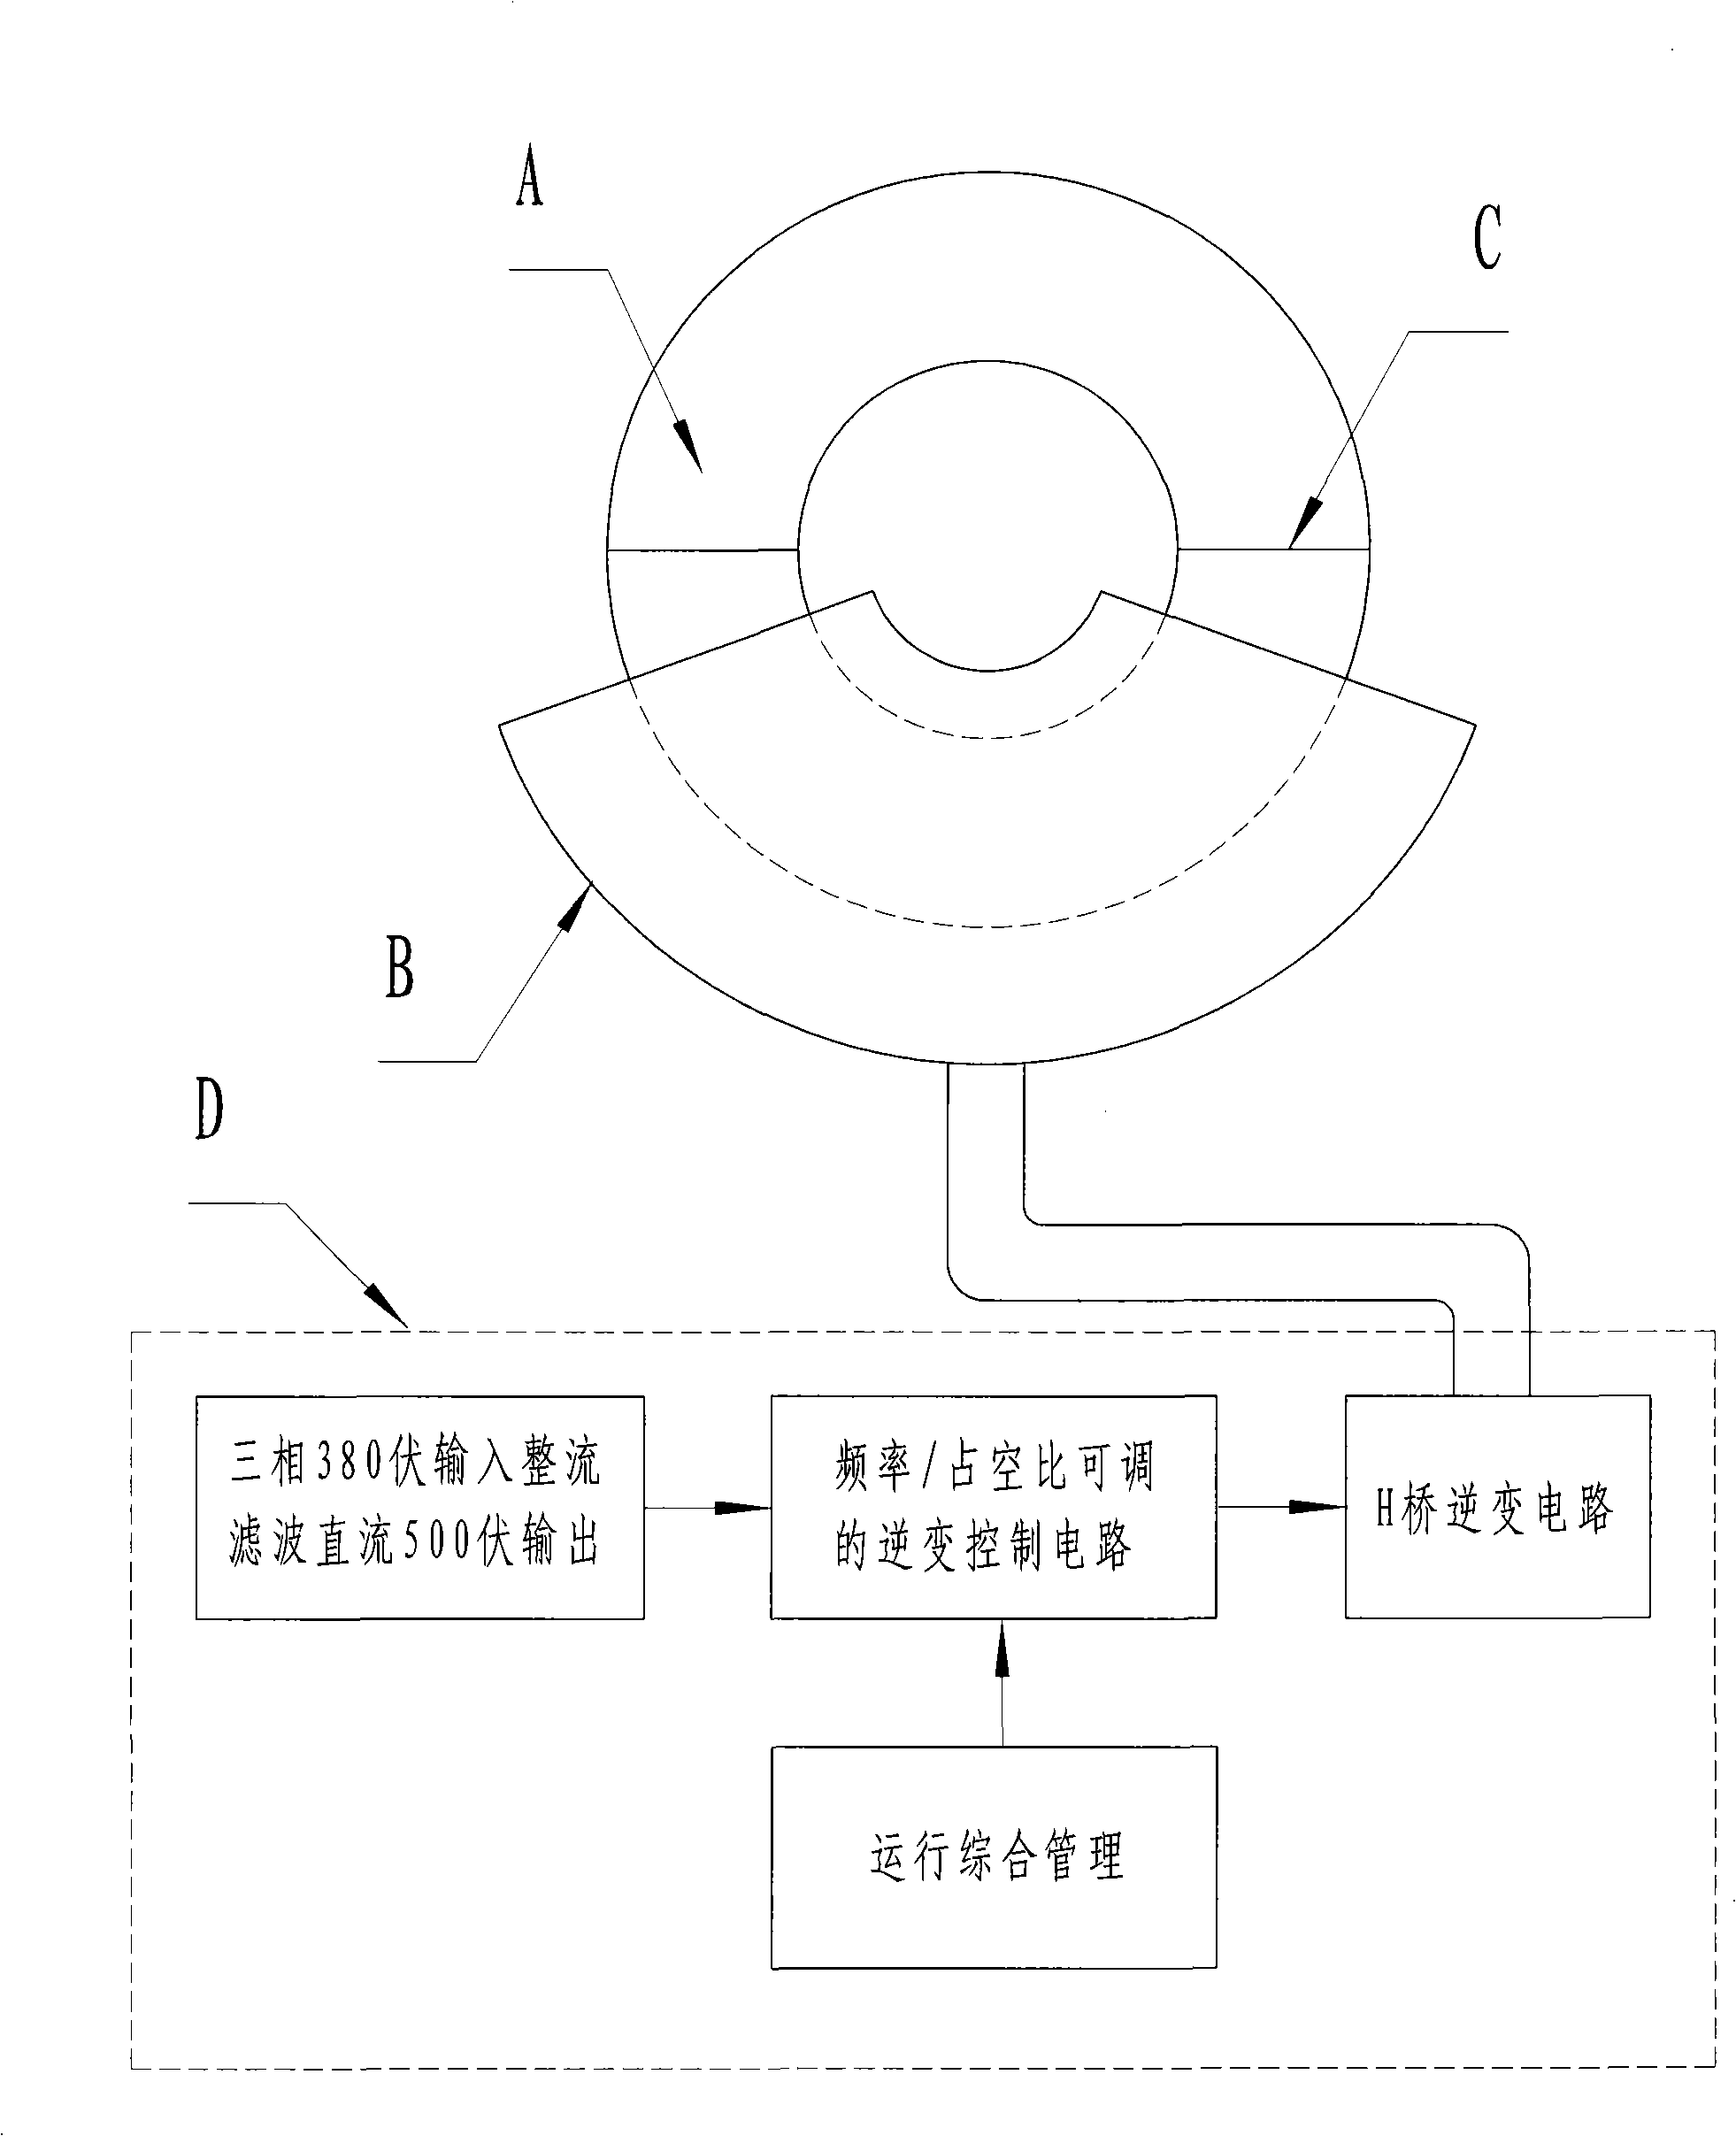 Method for deicing ground wire of high tension overhead transmission line